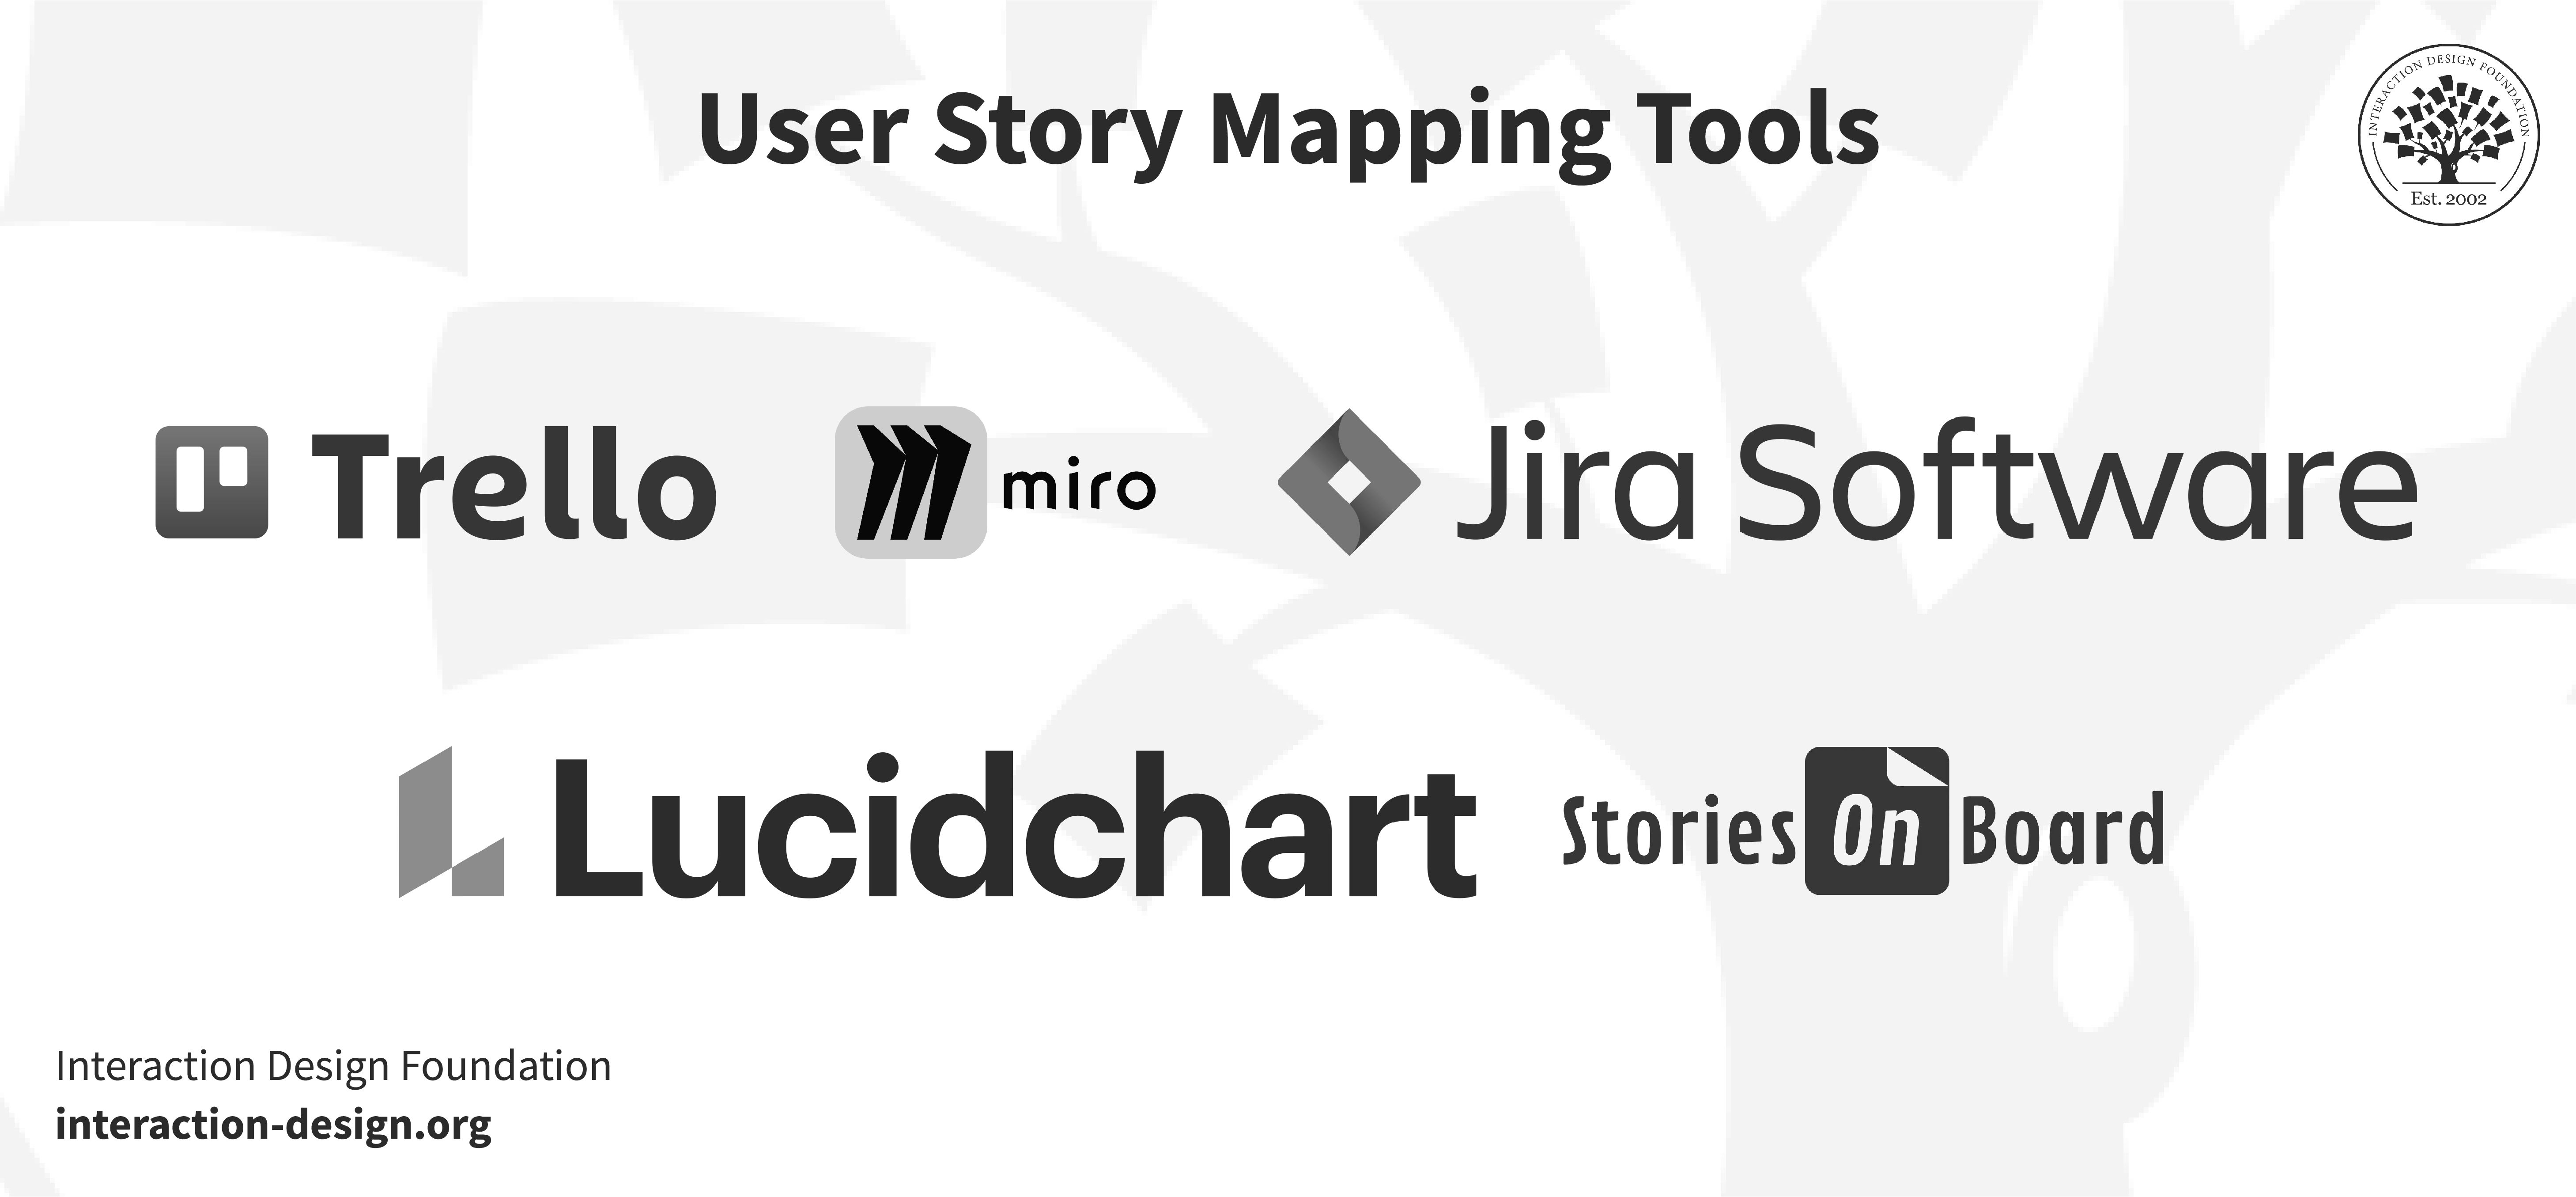 Image with the logos for 5 tools used for user story mapping. 